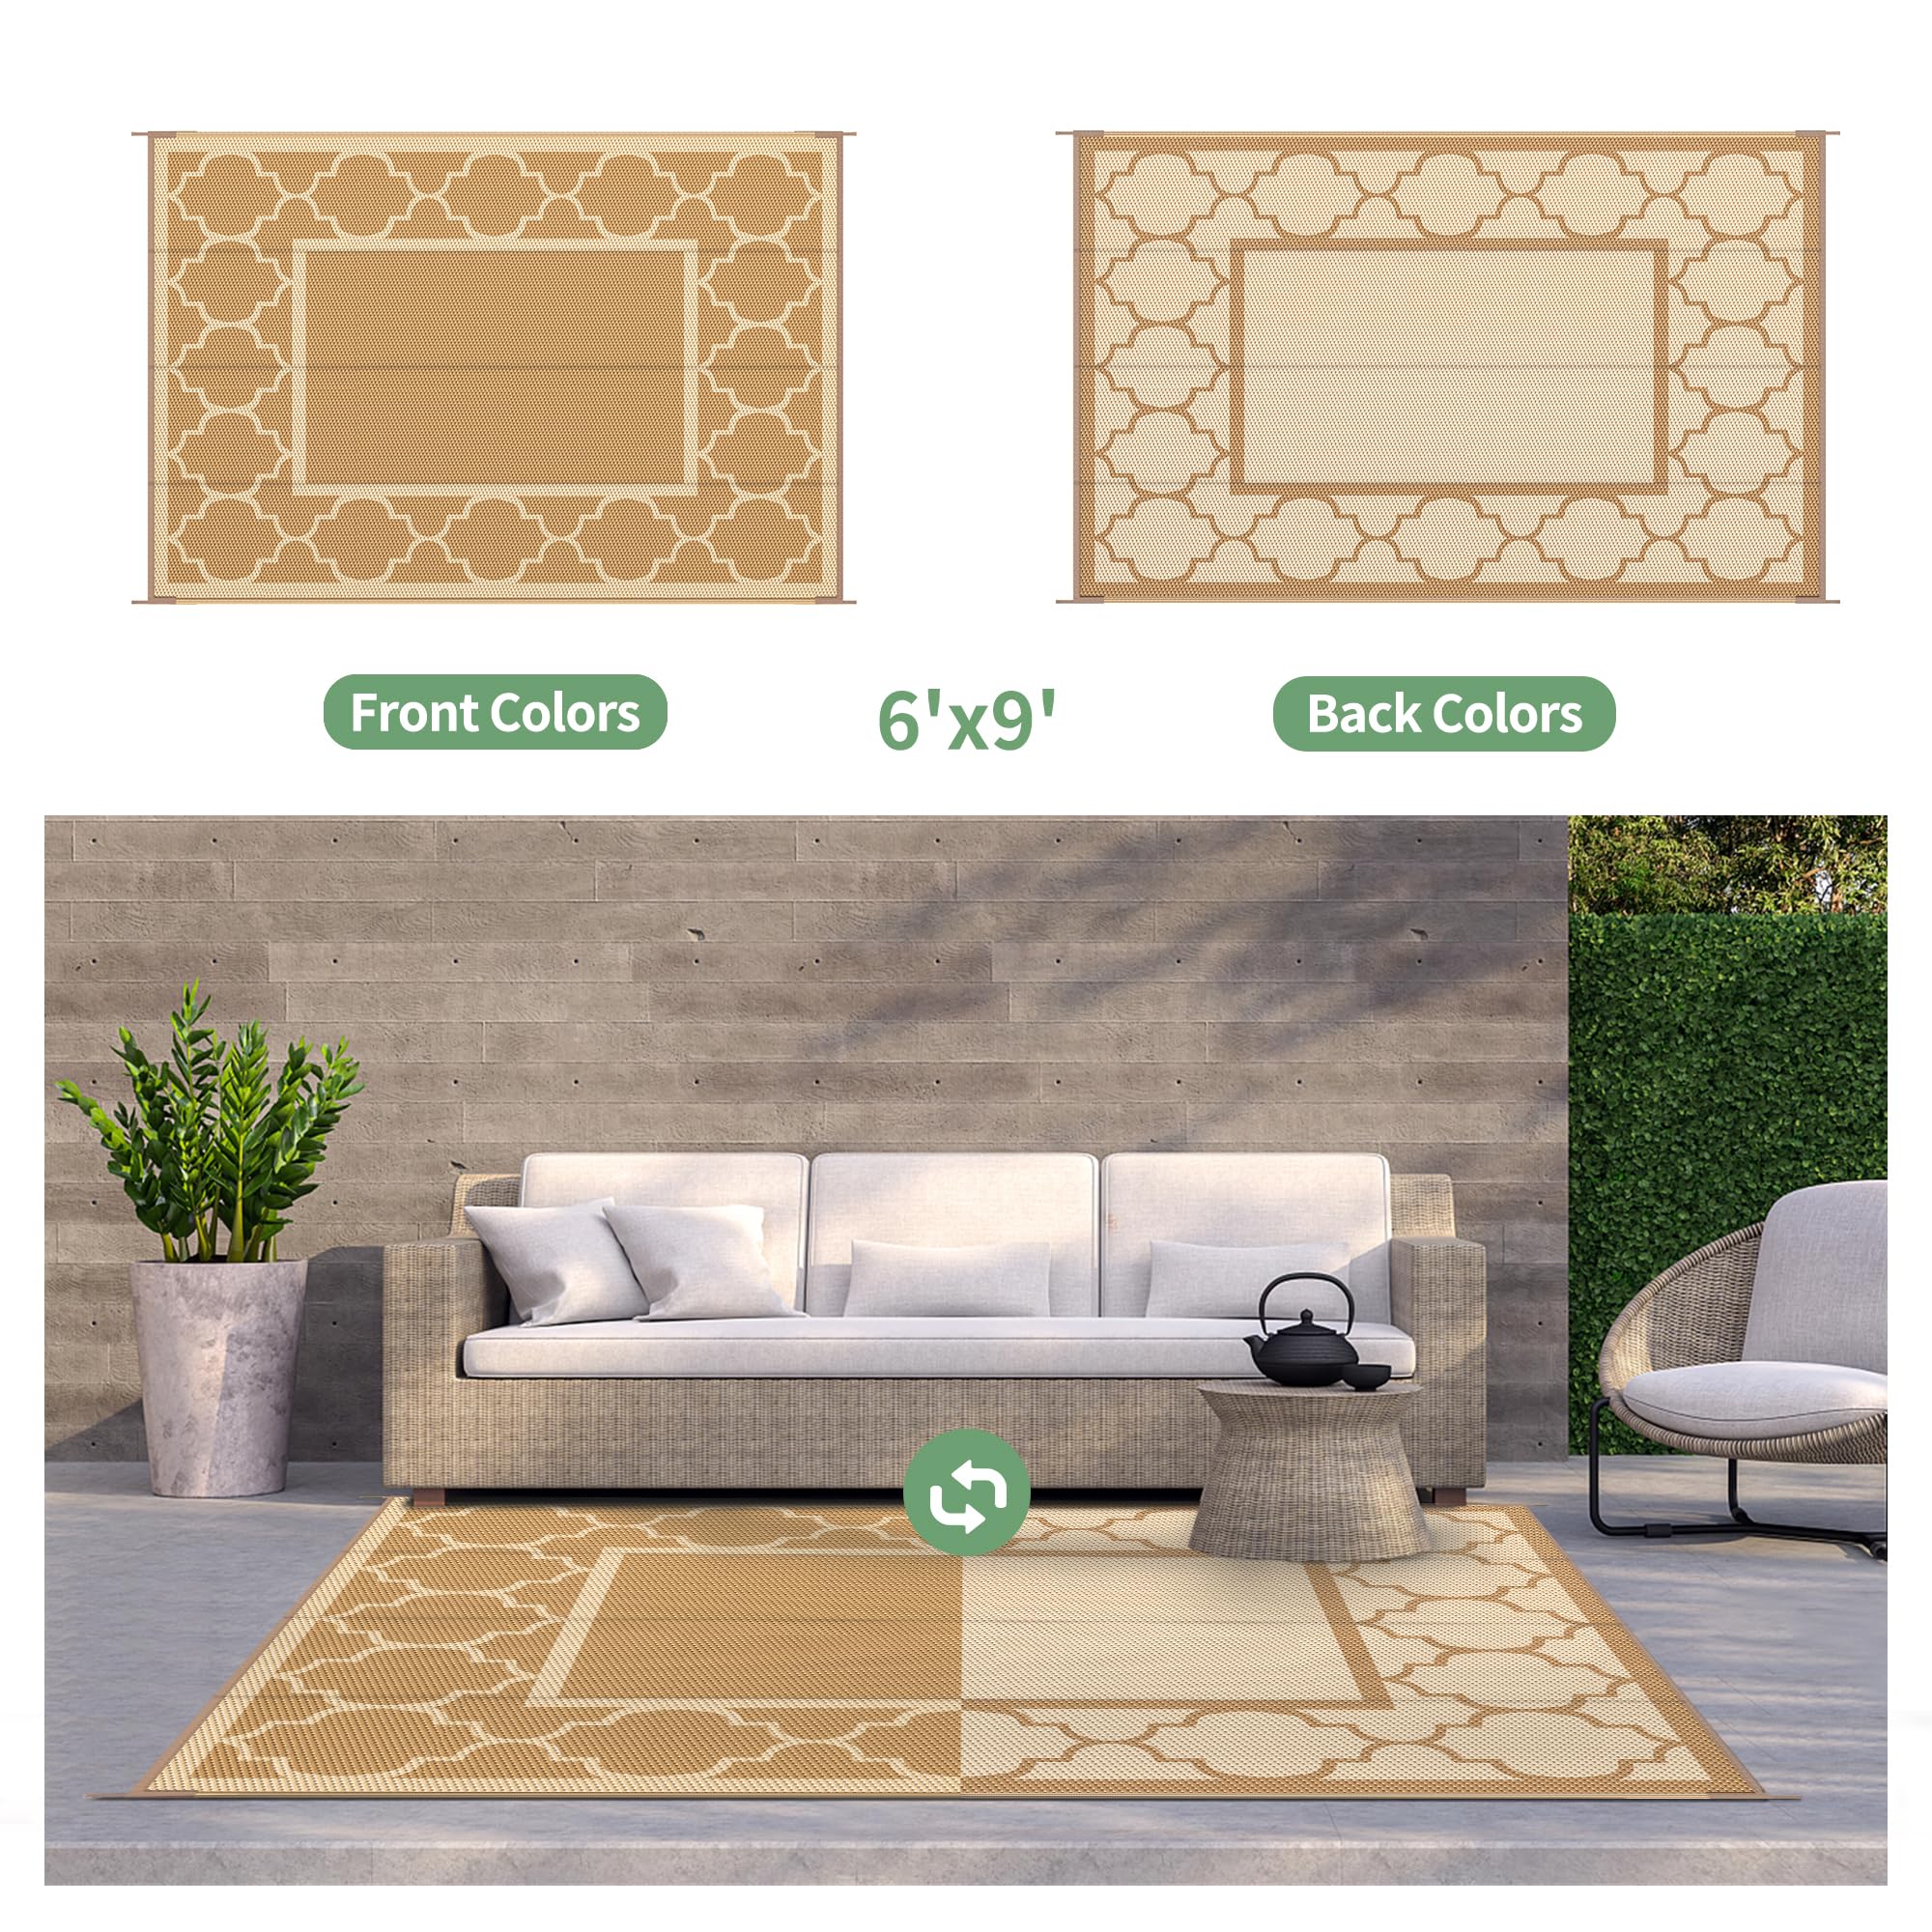 GENIMO 6' x 9' Outdoor Rug Waterproof for Patio Decor, Foldable Reversible Plastic Straw Area Rugs Mat for Camper, Outside Carpet for Rv, Deck, Porch, Picnic, Beach, Balcony, Brown & Beige